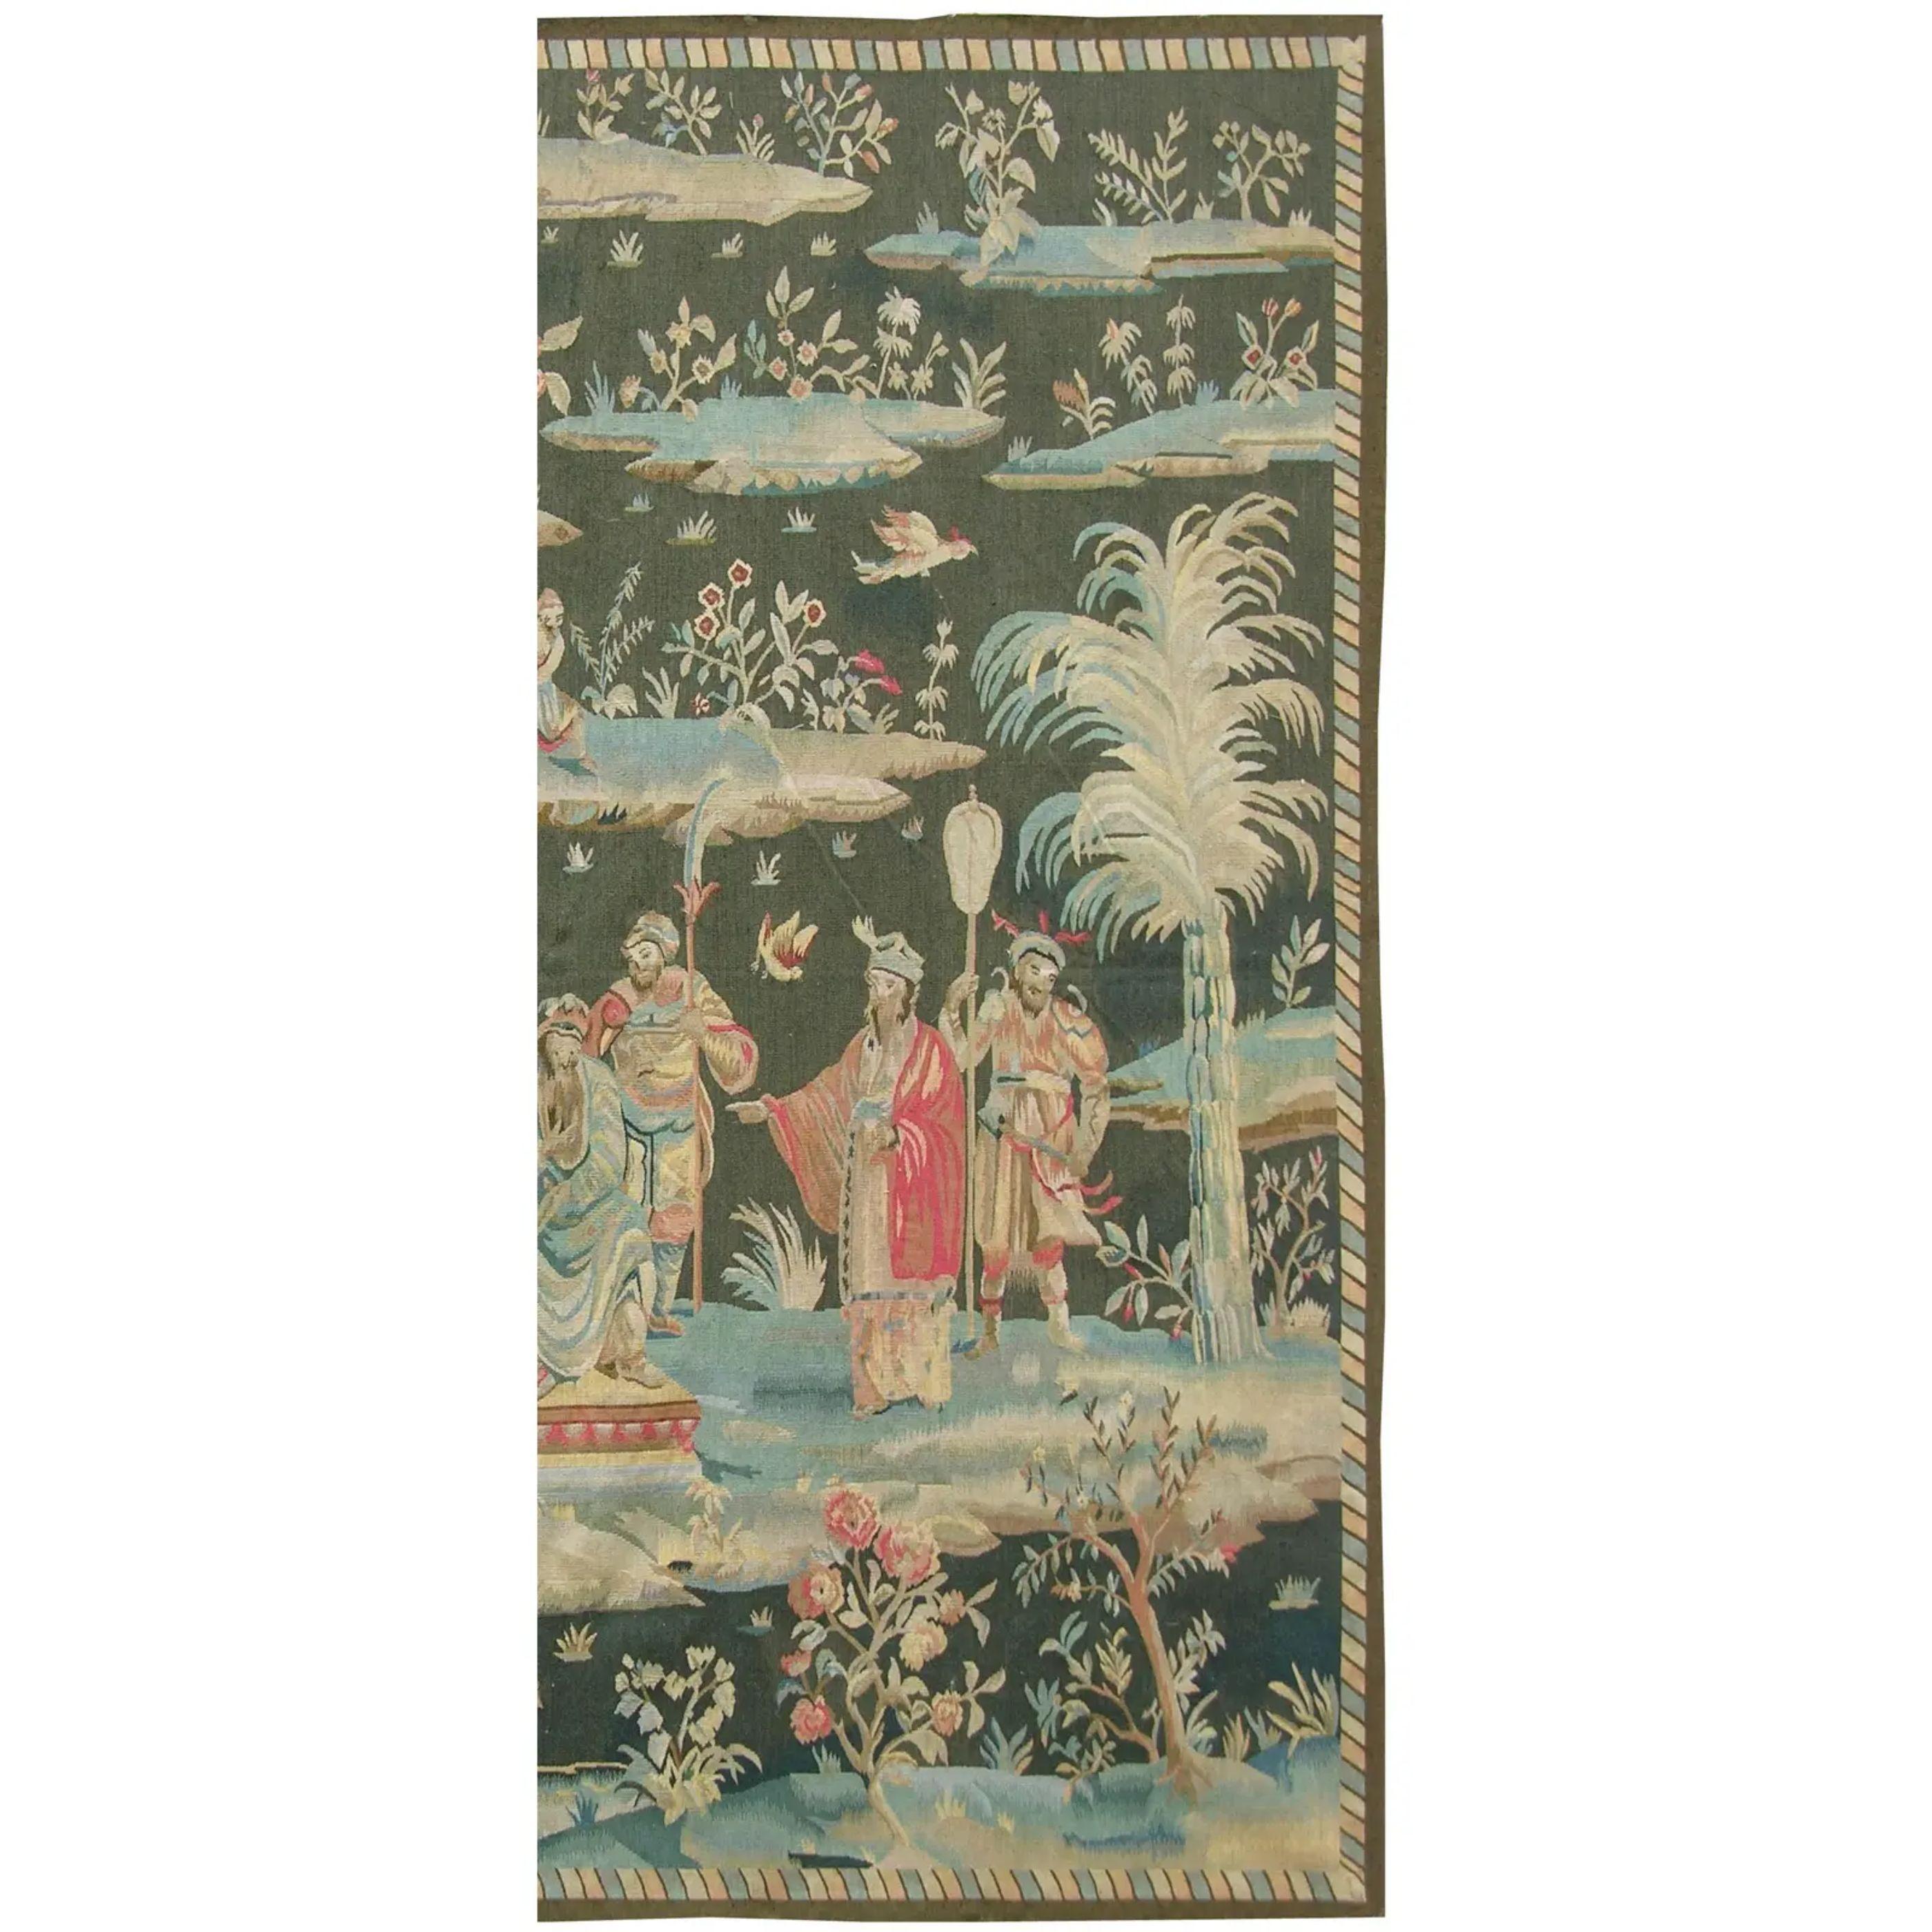 Empire Vintage Tapestry Depicting Royal Figures on Islands 6.5X5.5 For Sale